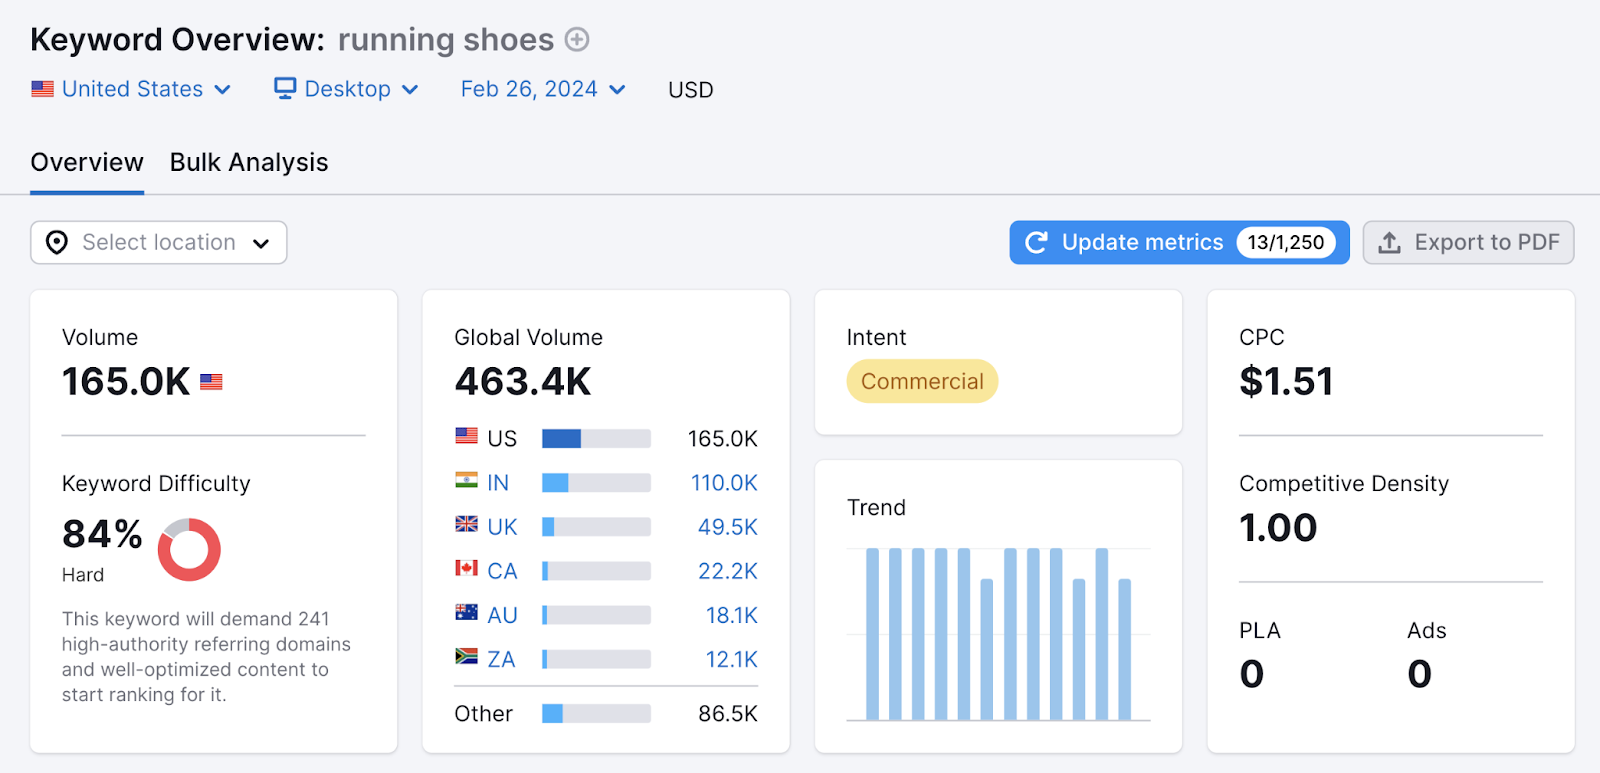 Keyword Overview results for "running shoes"